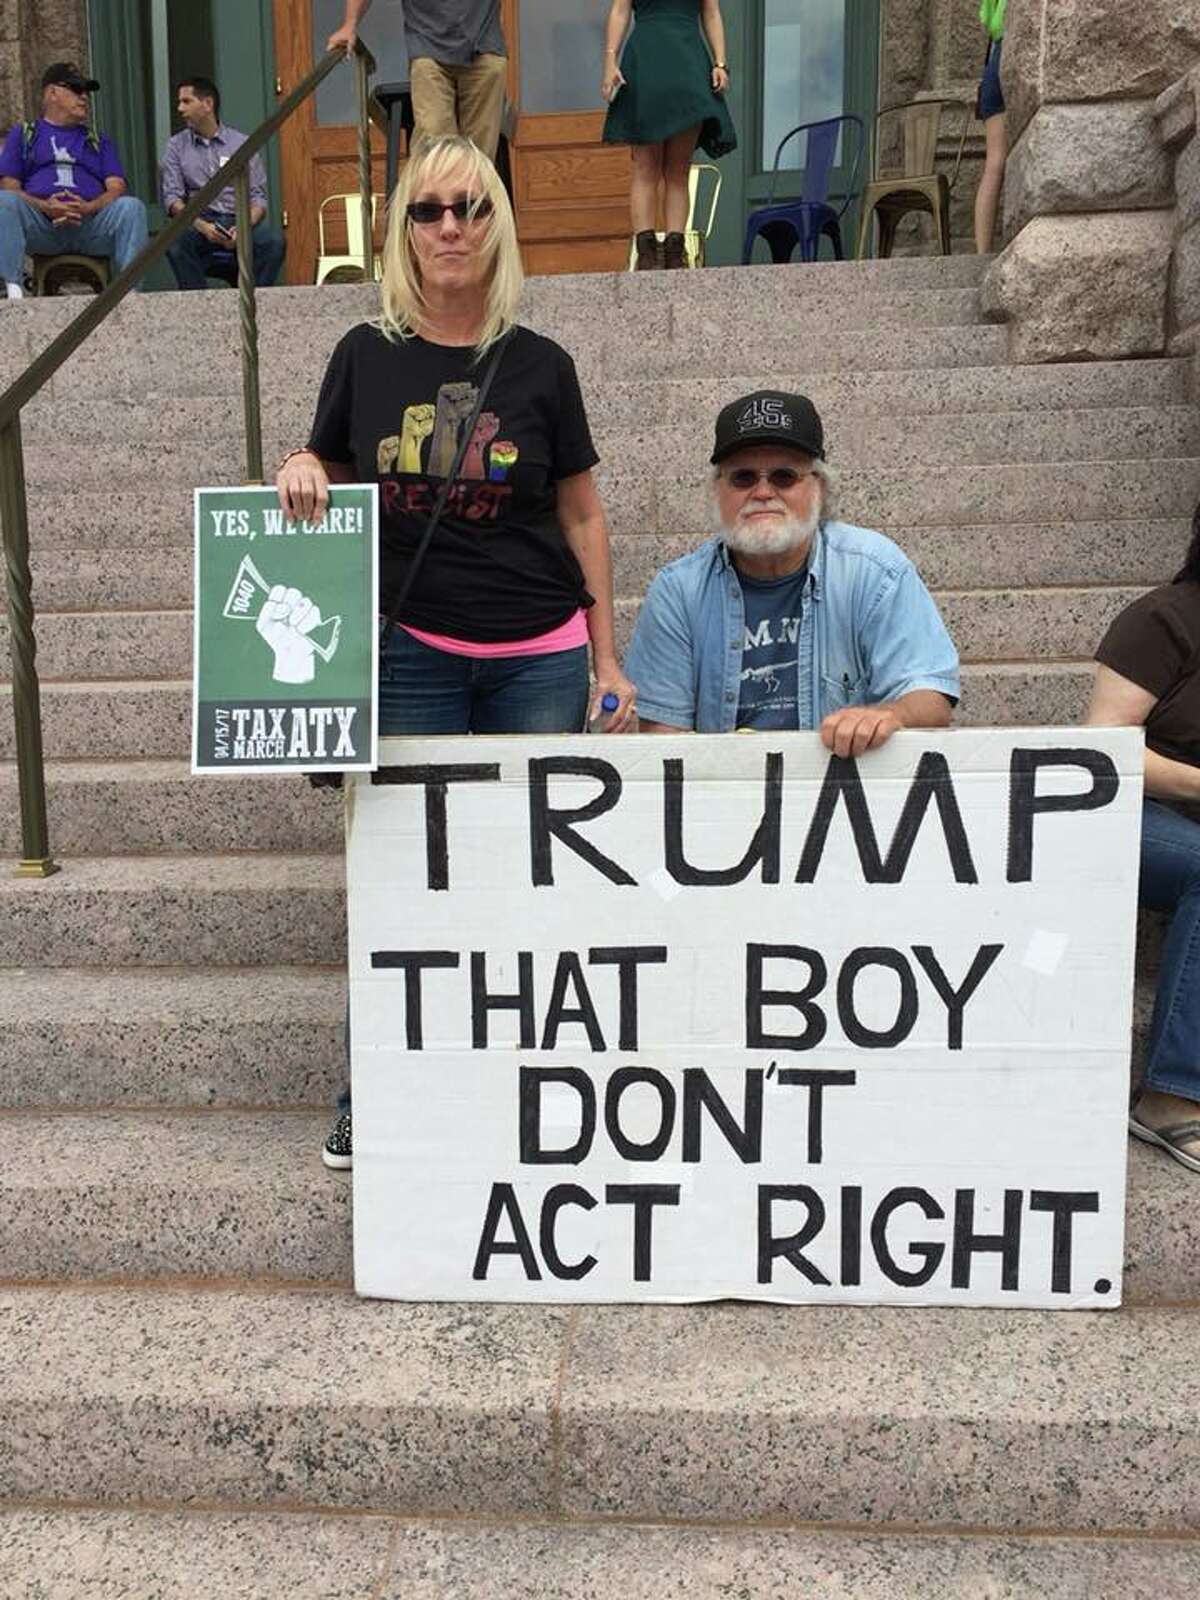 The last thing Gale McCray, 75, of Fort Worth, expected was for his simple anti-Trump sign to become one of the most recognizable images criticizing the commander-in-chief this year.